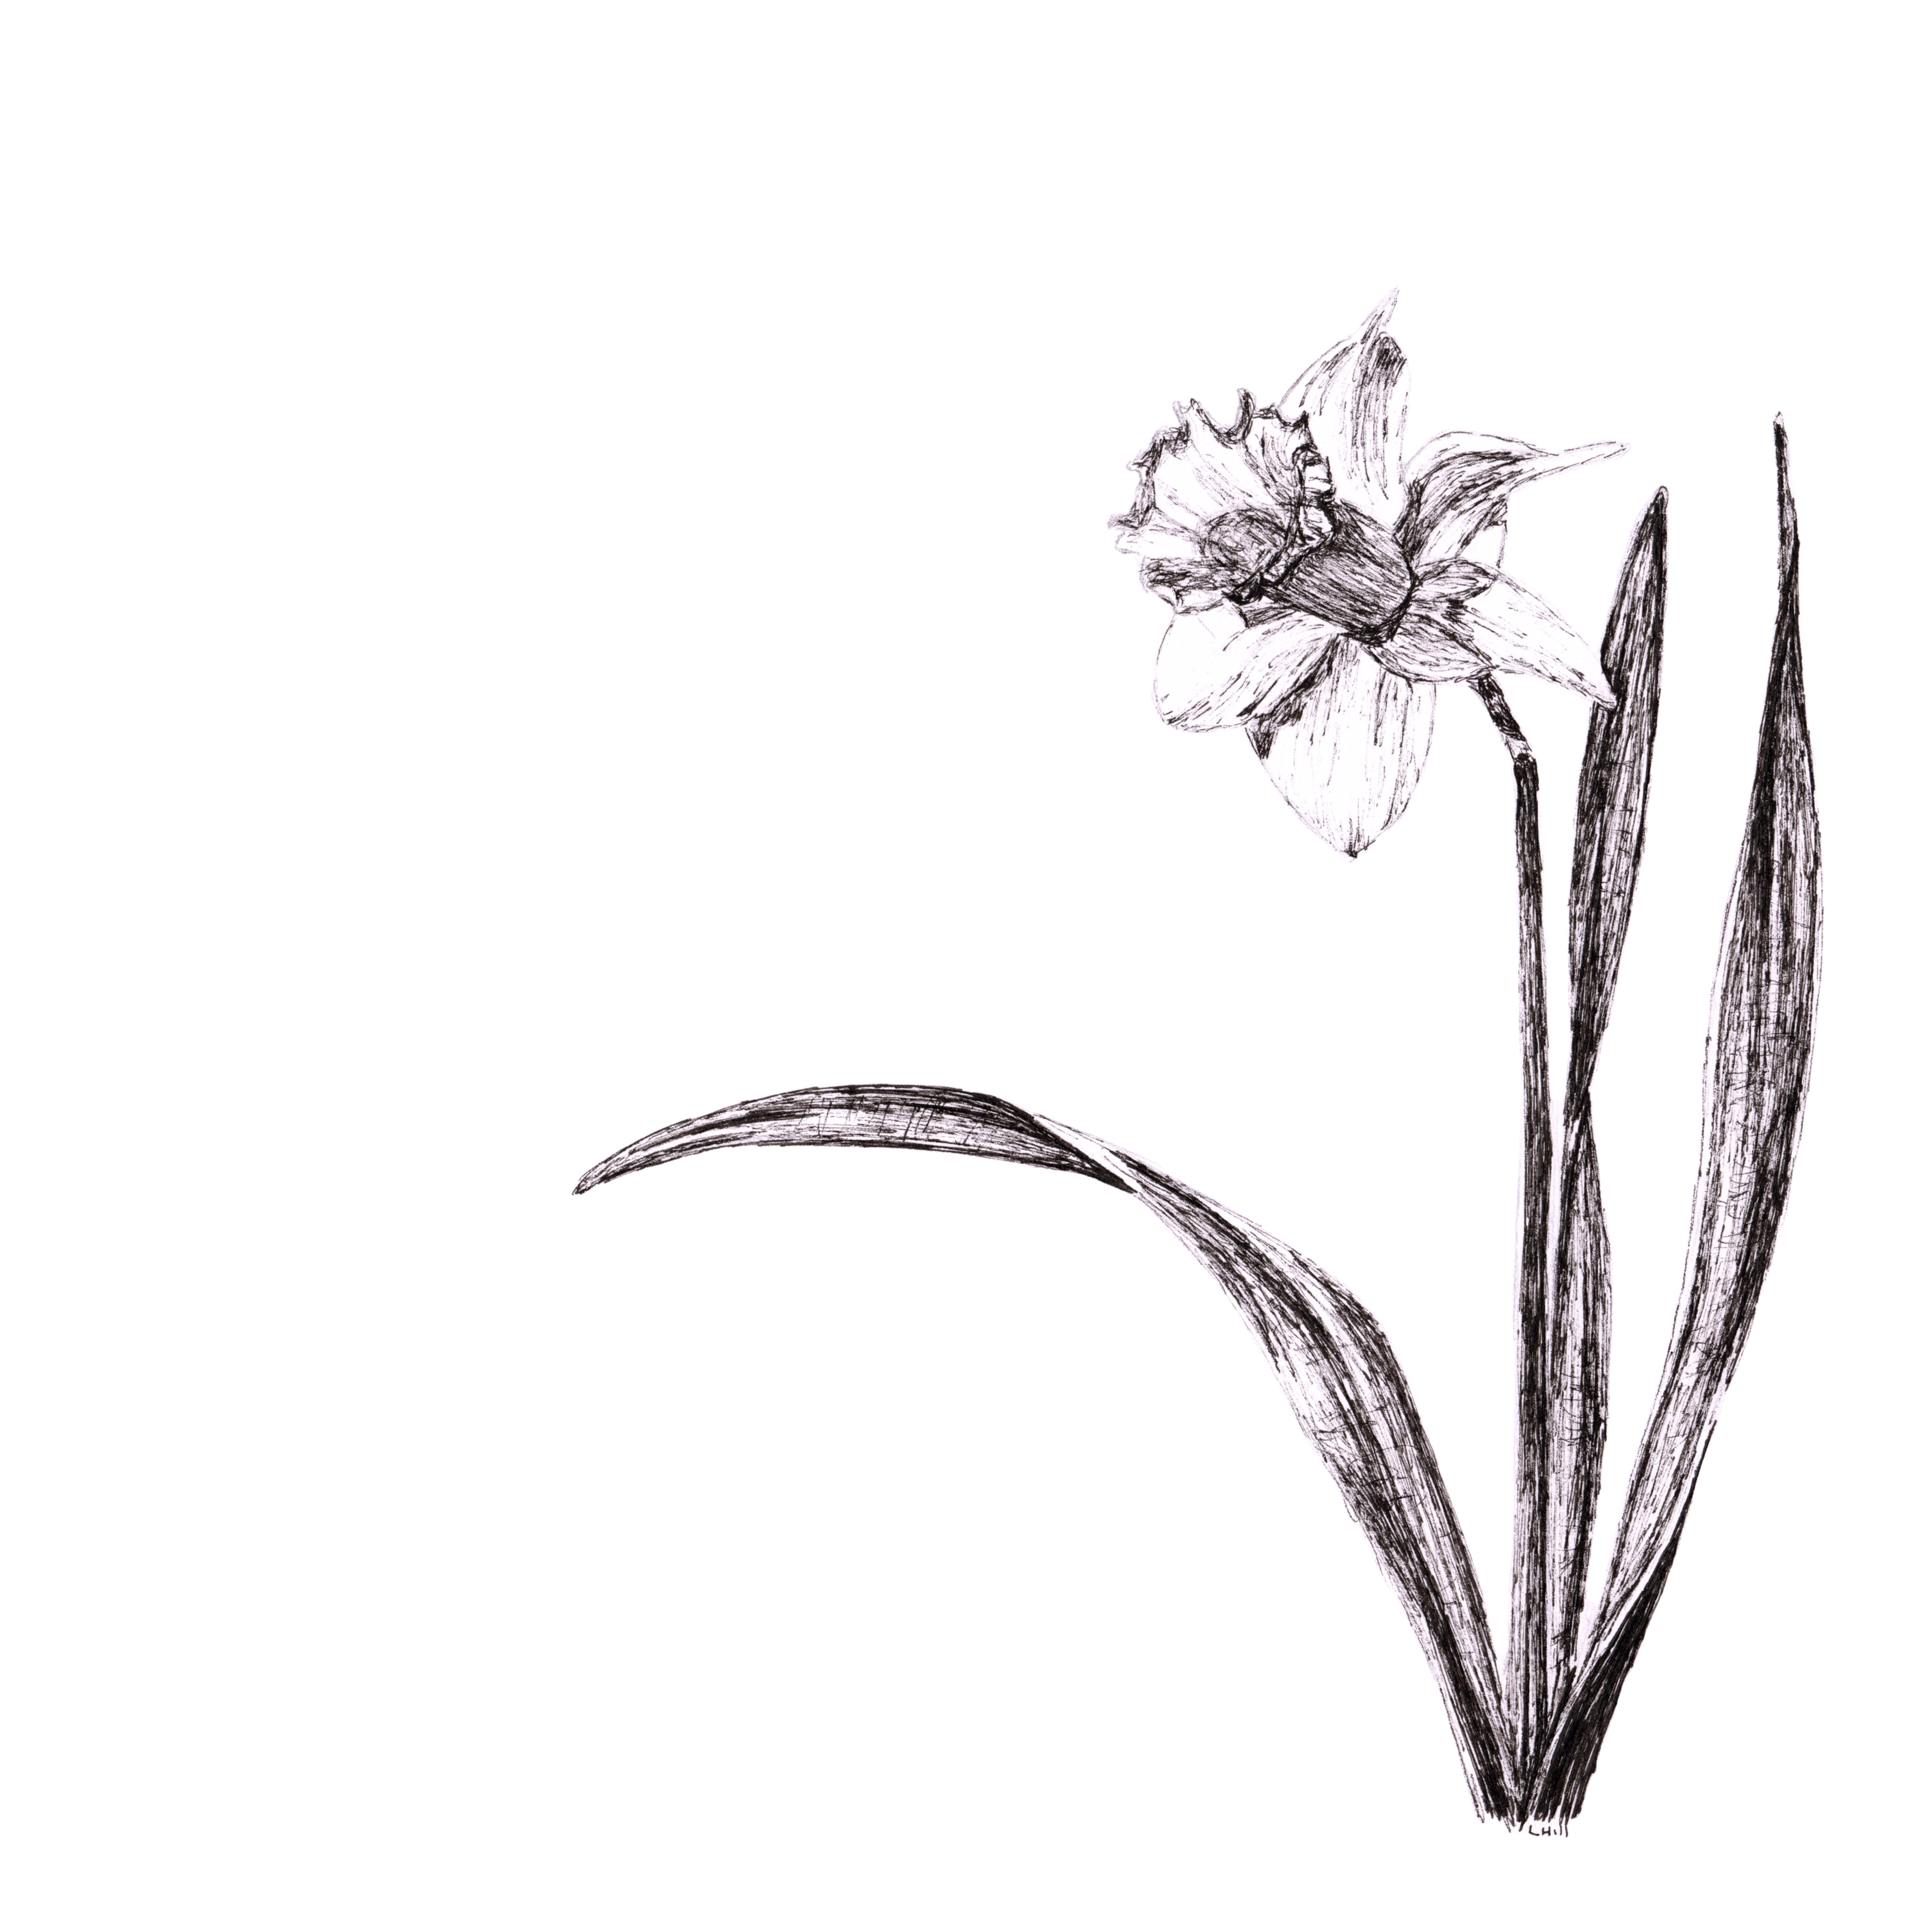 Daffodil pen and ink illustration by Louisa Hill